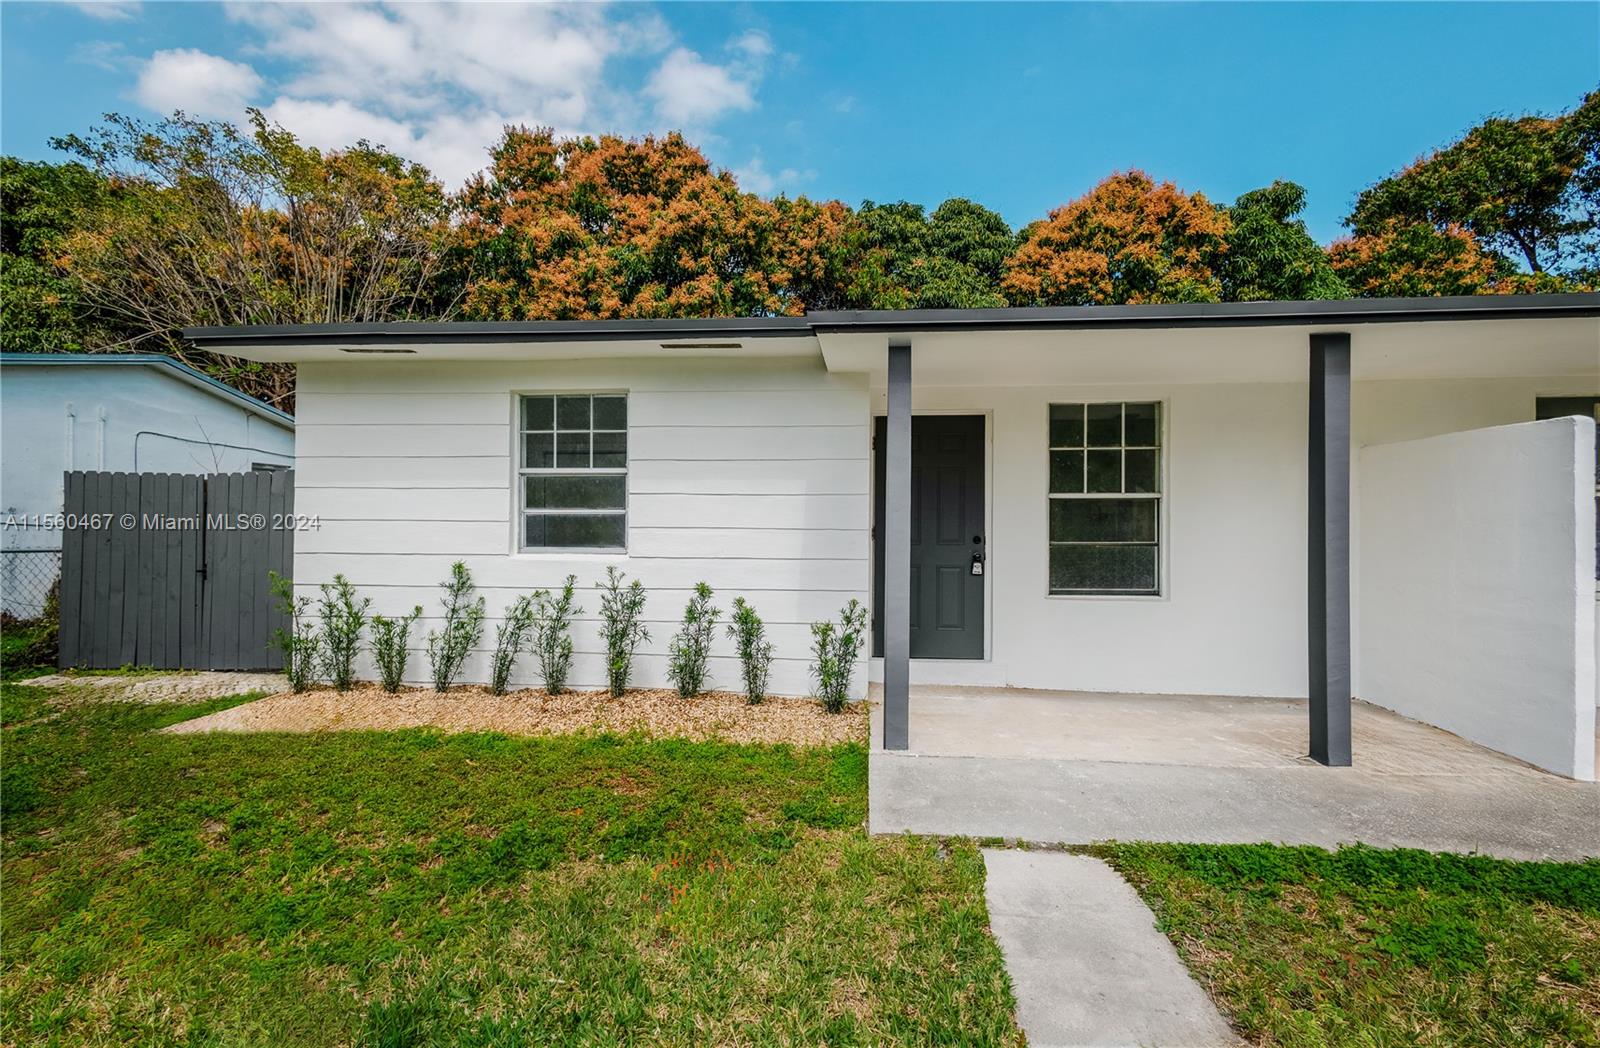 REMODELED DUPLEX IN THE HEART OF CUTLER BAY. EXTERIOR AND INTERIOR PAINTED.
NEW FLOOR THROUGHOUT, SOLID WOOD CABINETS, GRANITE COUNTERTOP, NEW SAMSUNG STAINLESS-STEEL APPLIANCES, MODERN BATHROOMS HIGHT IMPACT WINDOWS, CONCRETE TERRACE DECK, 2 PARKING SPACE, NEW LANDSCAPING, RELAXING FENCED BACK YARD. 
ONLY MINS AWAY FROM TURNPIKE EXPRESSWAY
2.5 M SOUTHLAND MALL
5 M MIAMI ZOO
2.5 M SOUTH POINT MARINA
2.5 M LARRY AND PENNY PARK
1.5 M DOWNTOWN CUTLER BAY
SHOPPINGS & RESTAURANTS 1 MINUTE DRIVE
NEW PUBLIX 1 MINUTE DRIVE

EASY TO SHOW!!!